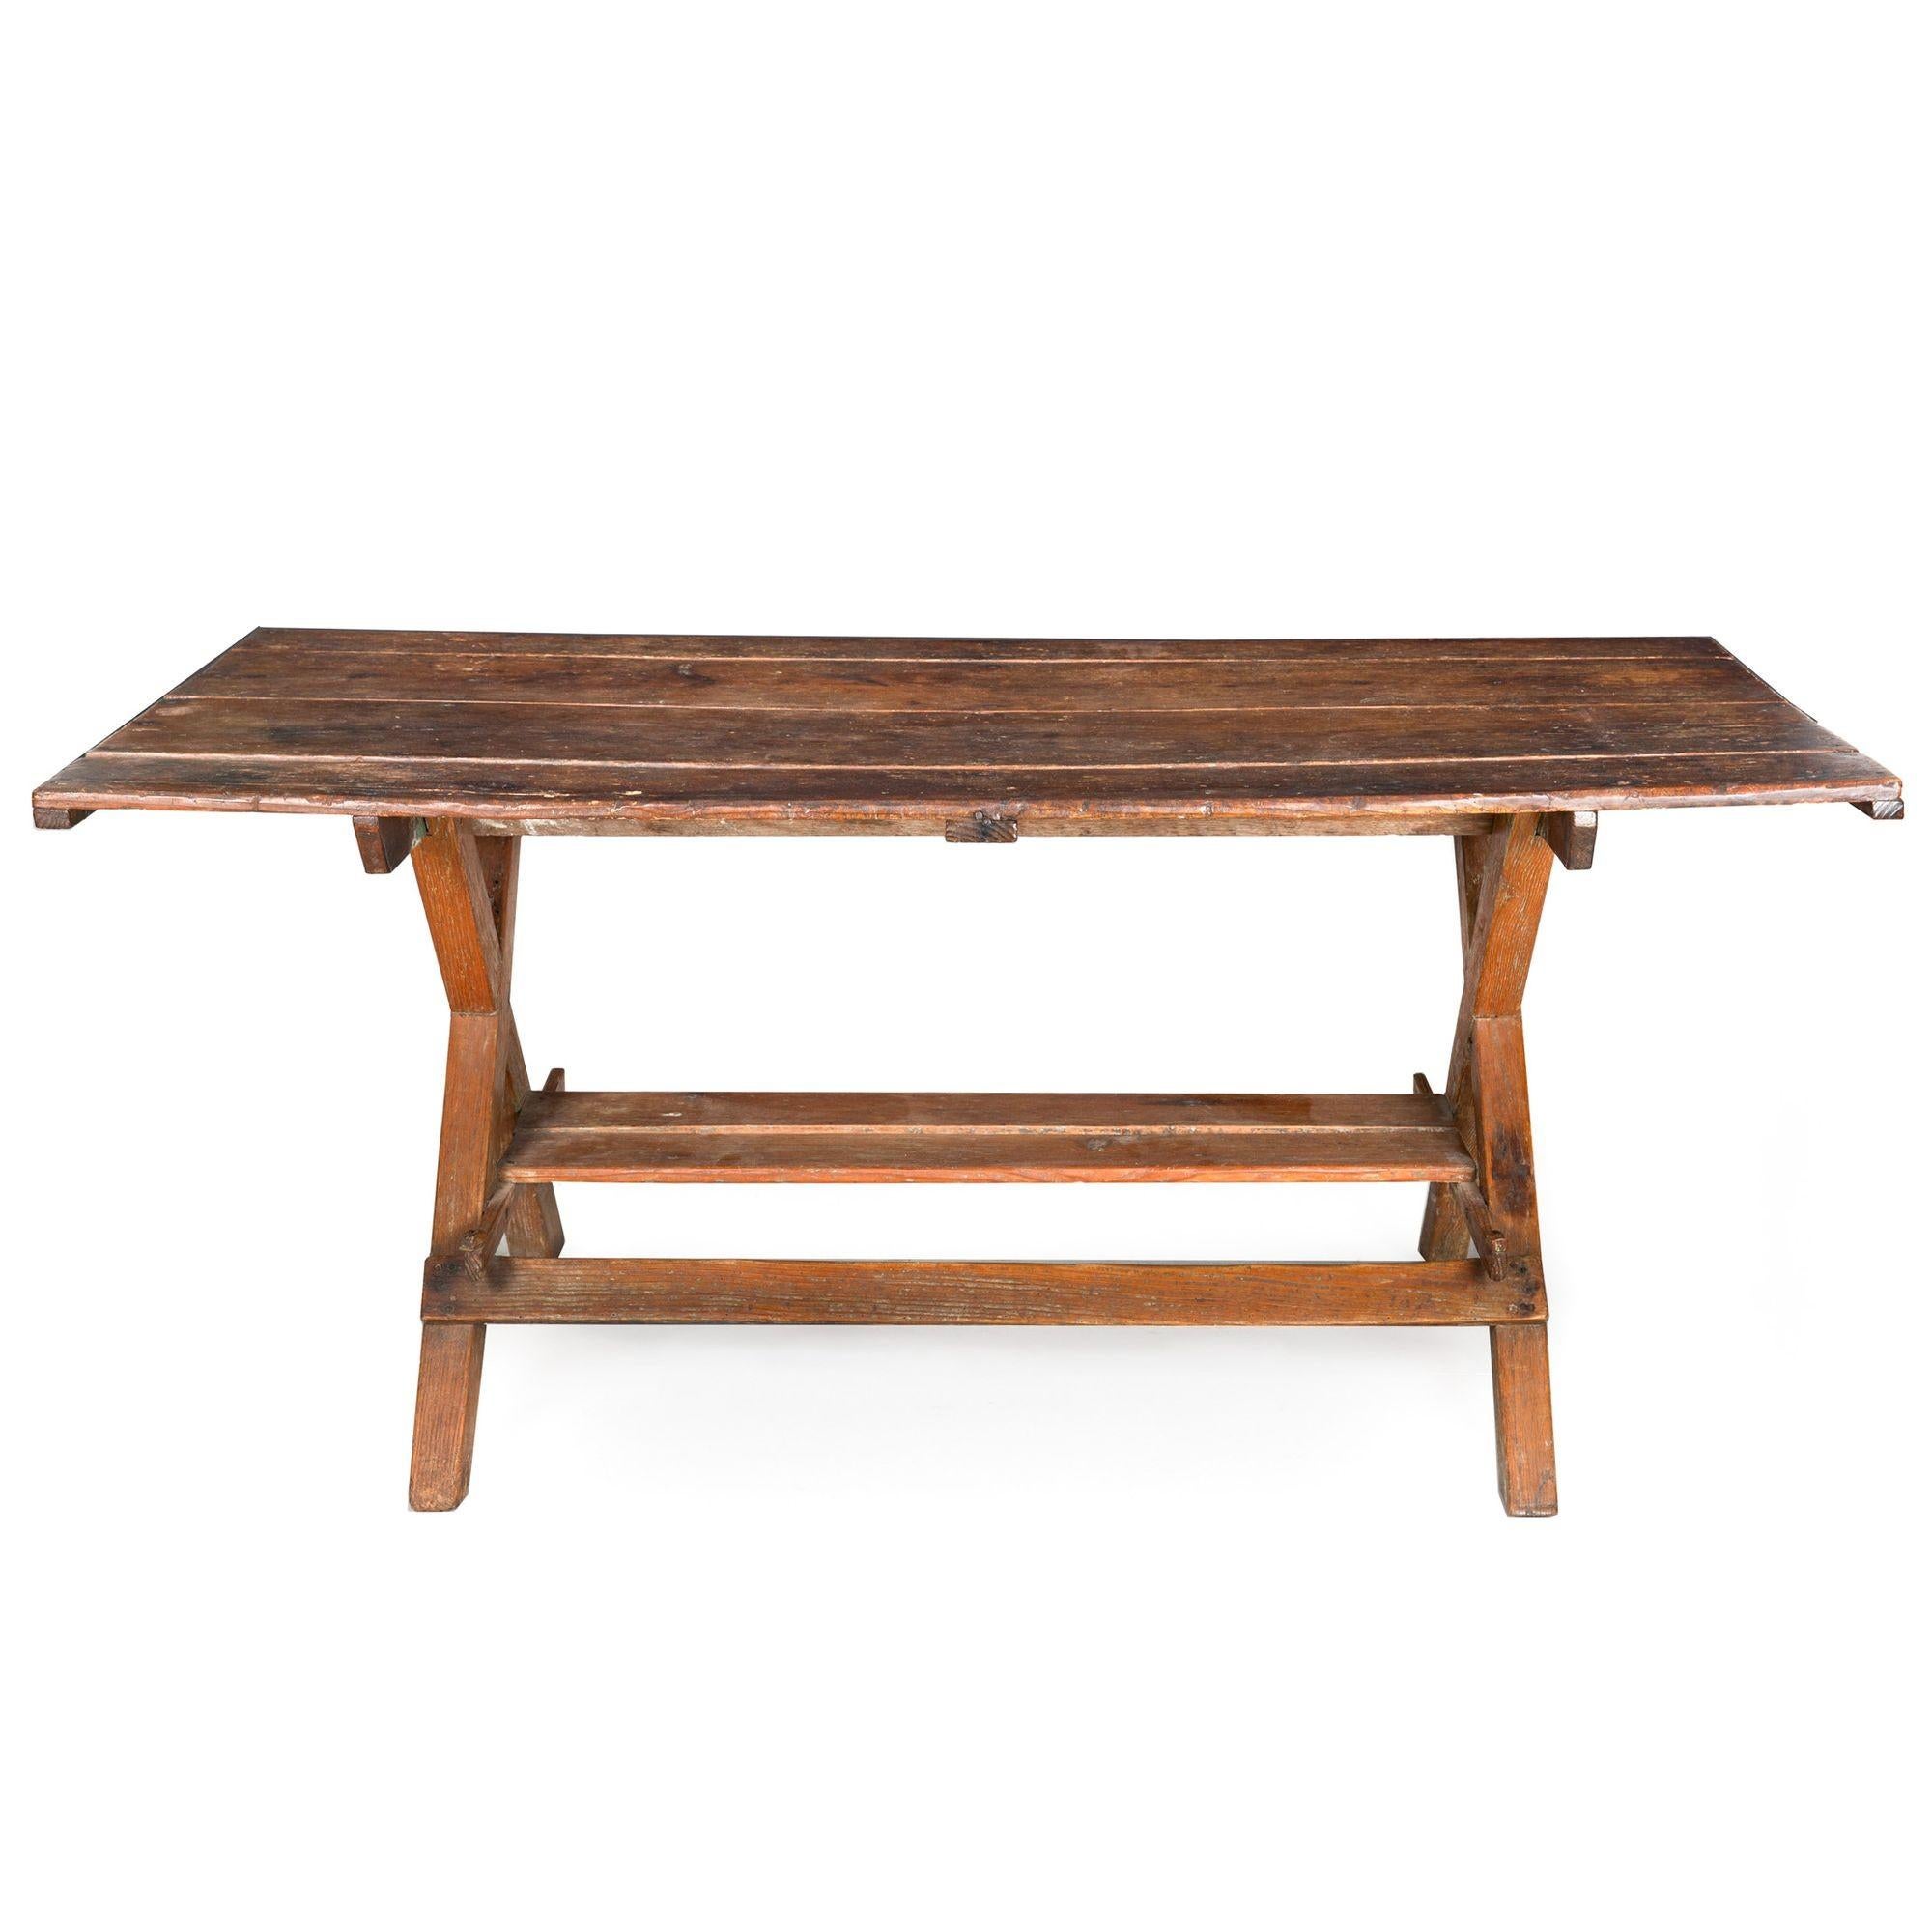 This remarkable American trestle table is distinguished by its impressive surface patina. It showcases an X-form leg profile crafted from solid oak, complemented by a shelved stretcher at the bottom. The top of the table consists of four solid